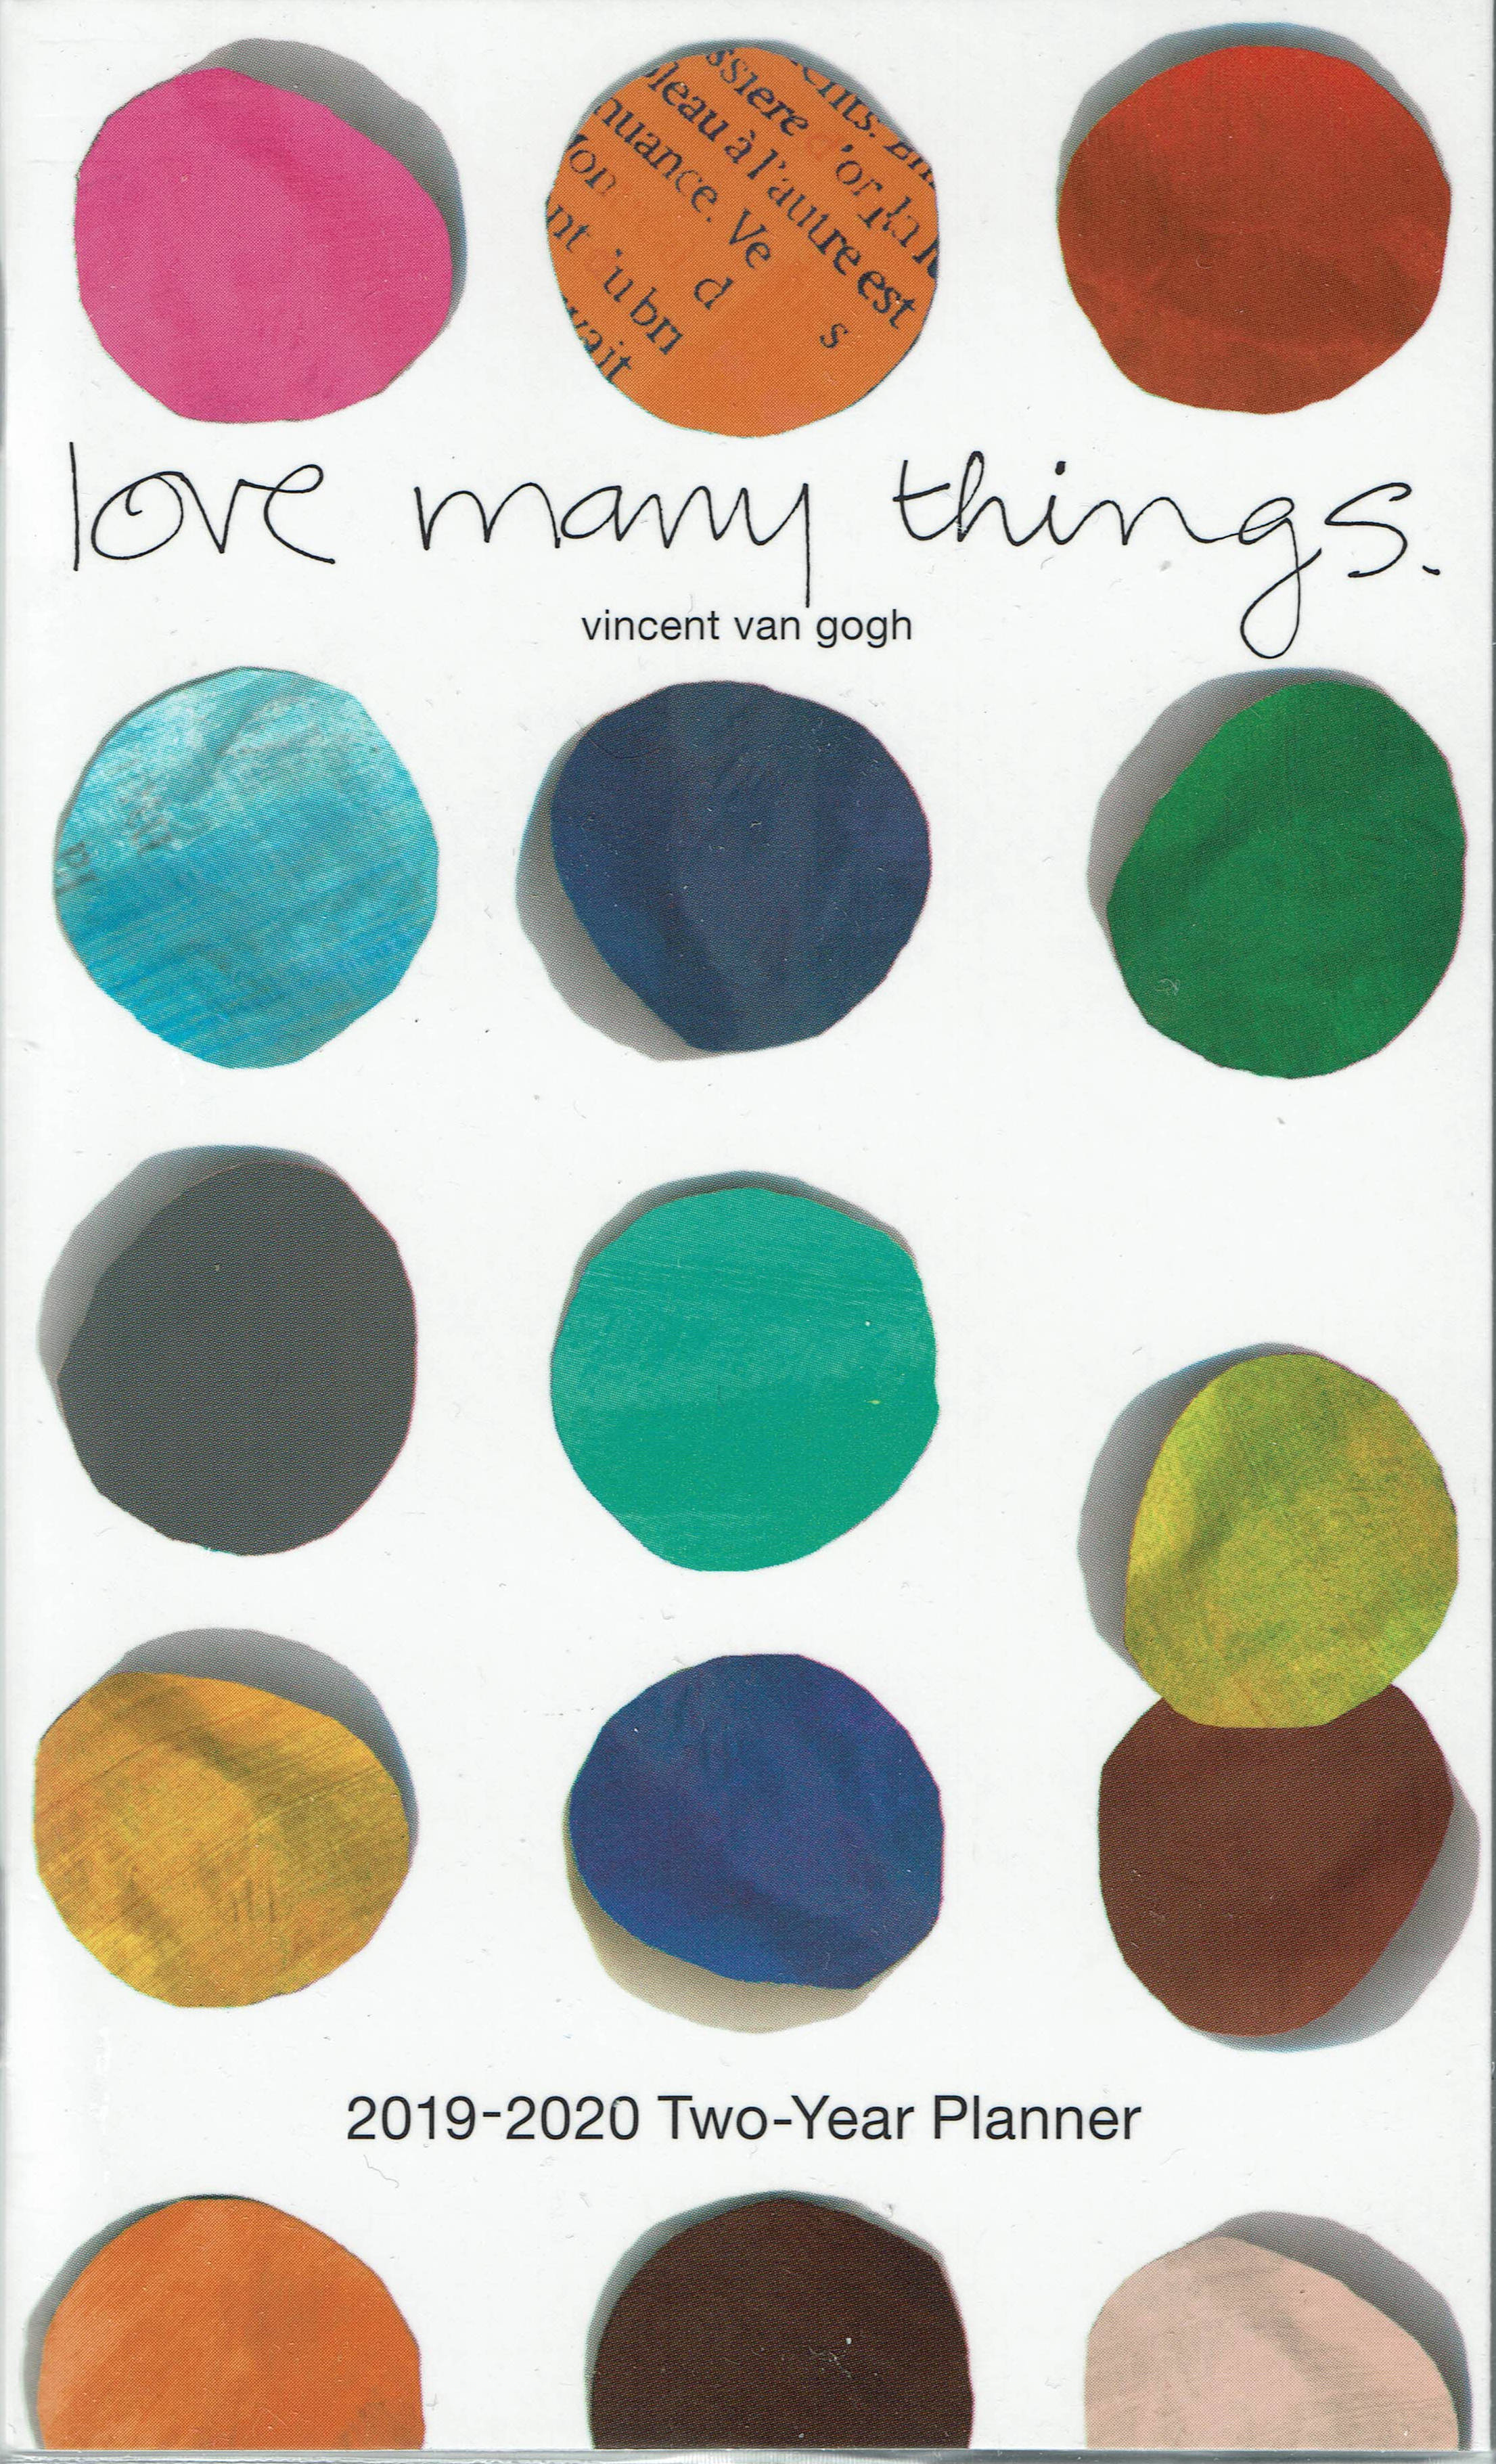 Love Many Things: 2019-2020 Two-Year Planner Diary by Graphique de France